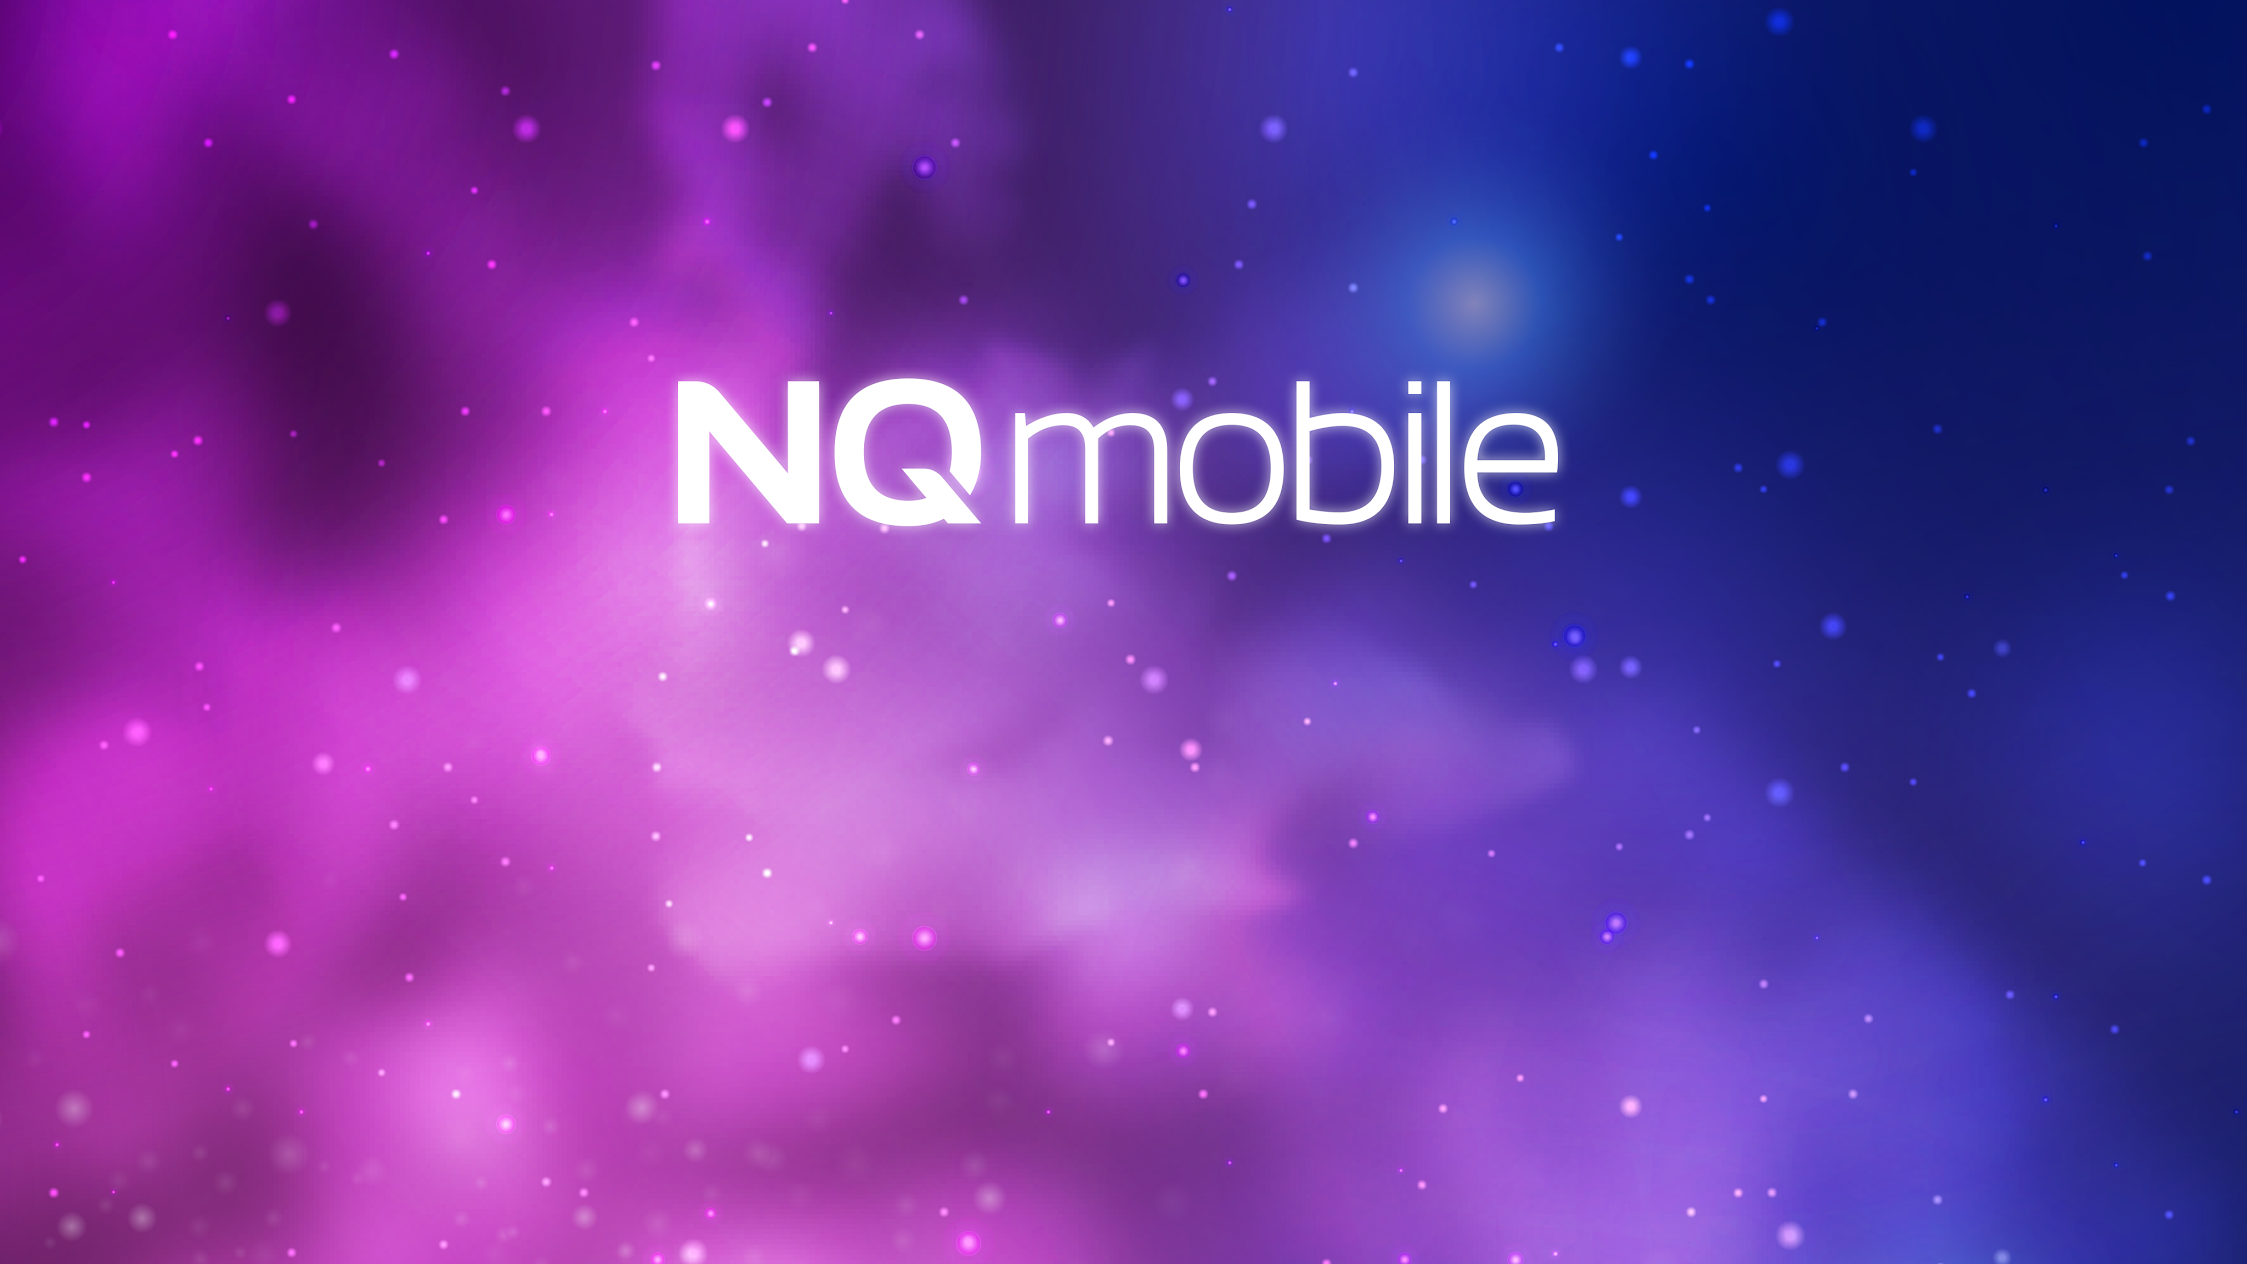 NQ Mobile Security (NYSE:NQ)